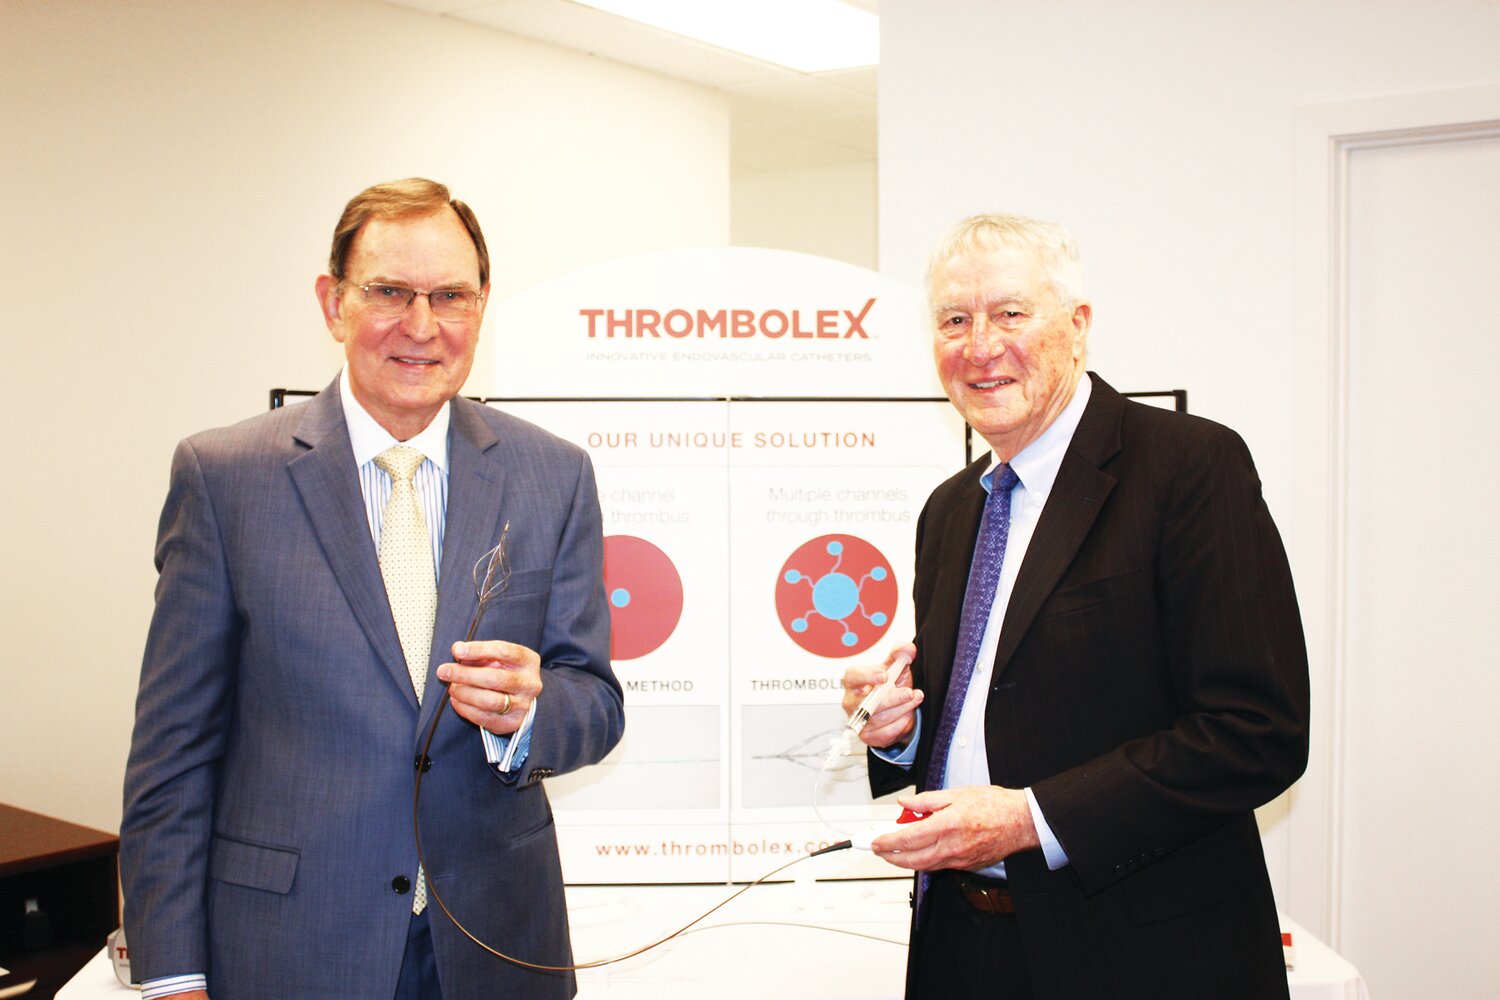 Dr. Brian G. Firth, chief scientific officer, left, and Marvin Woodall, executive chairman of the board of directors, discuss one of Thrombolex’s BASHIR catheters.